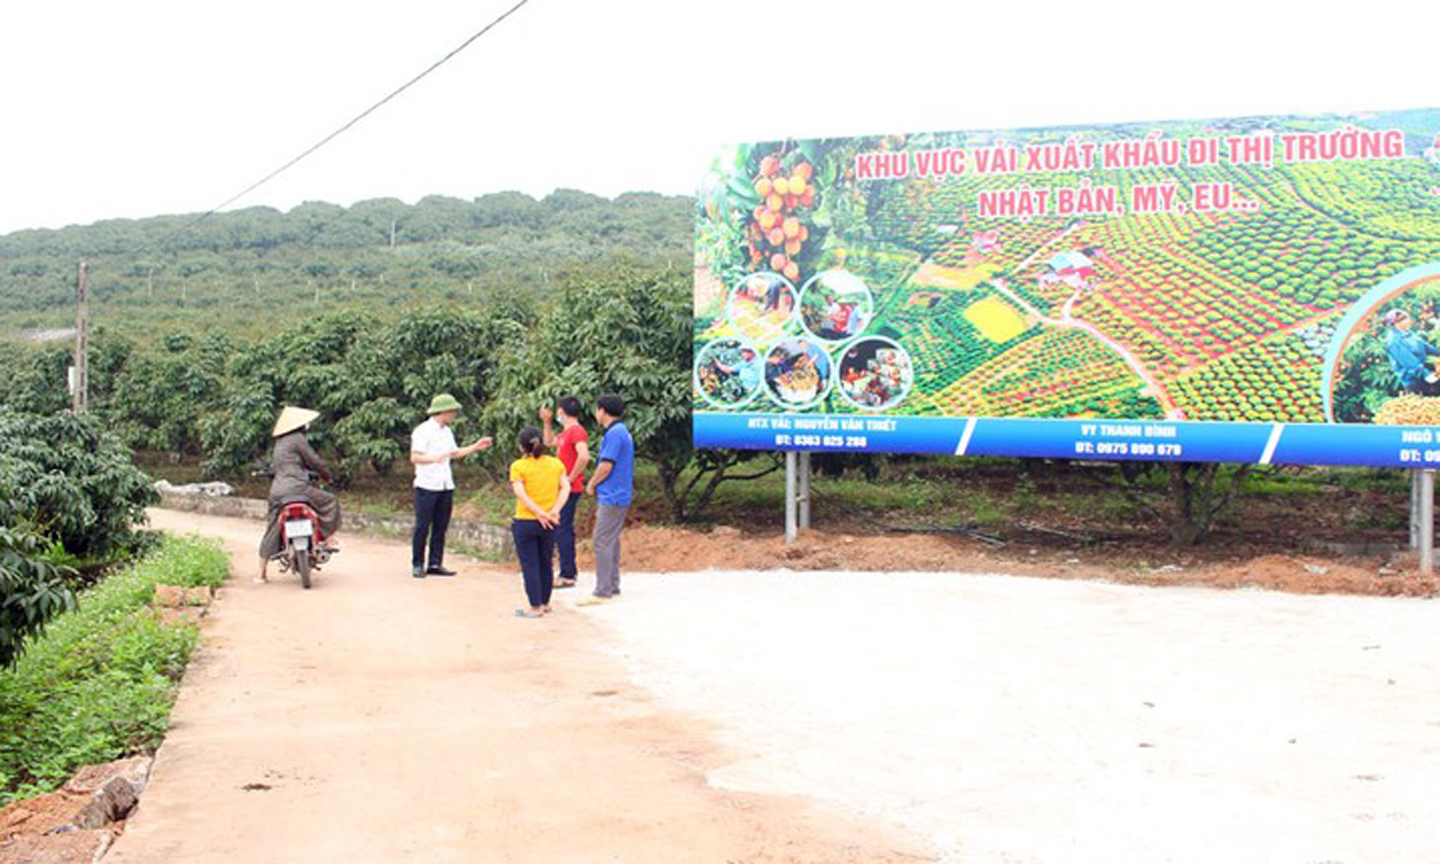 A lychee growing zone for export in Bac Giang Province.